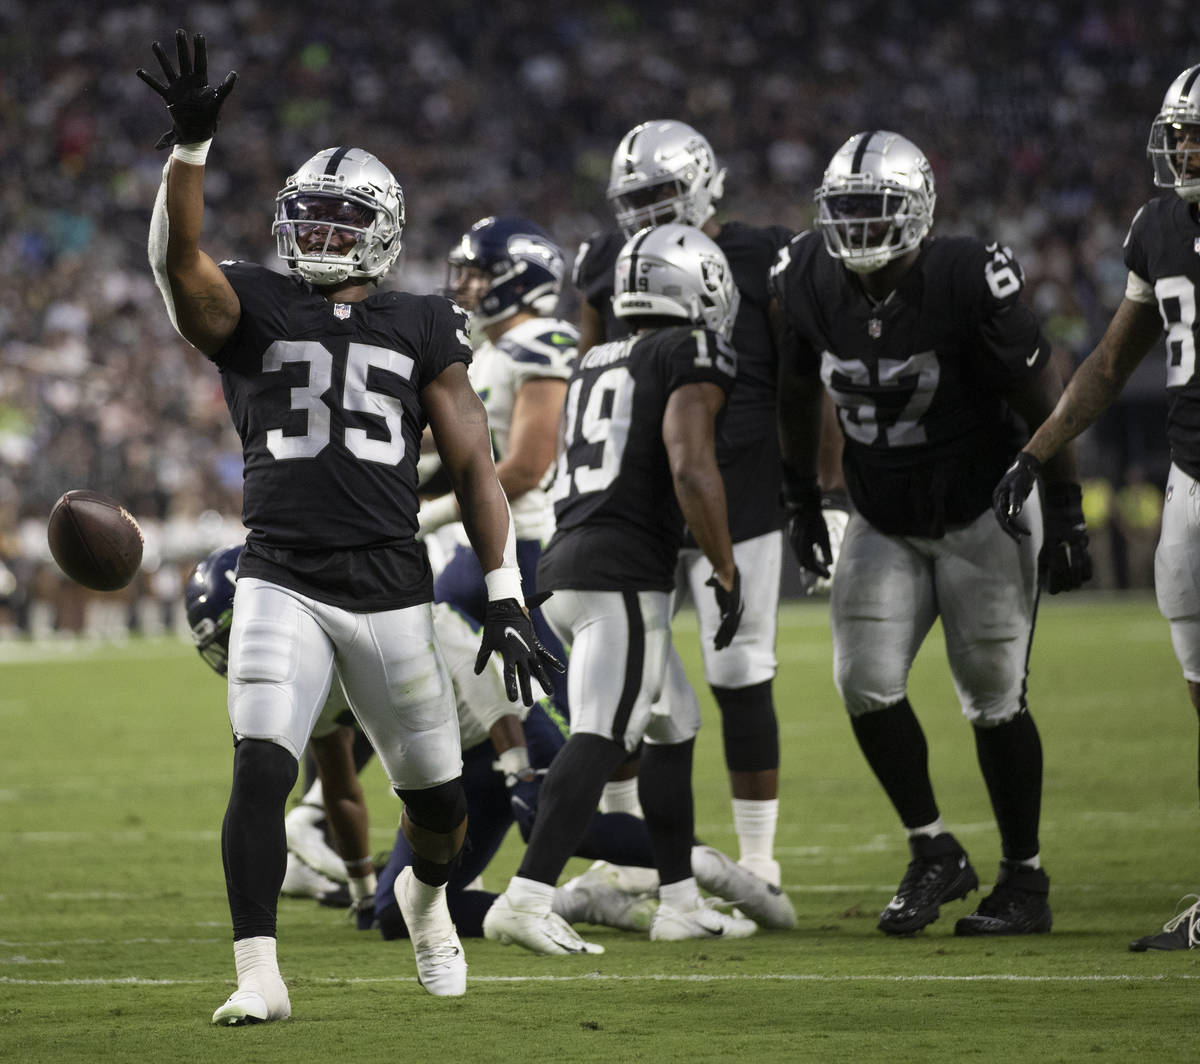 Raiders running back BJ Emmons (35) celebrates a big run in the second quarter during an NFL pr ...